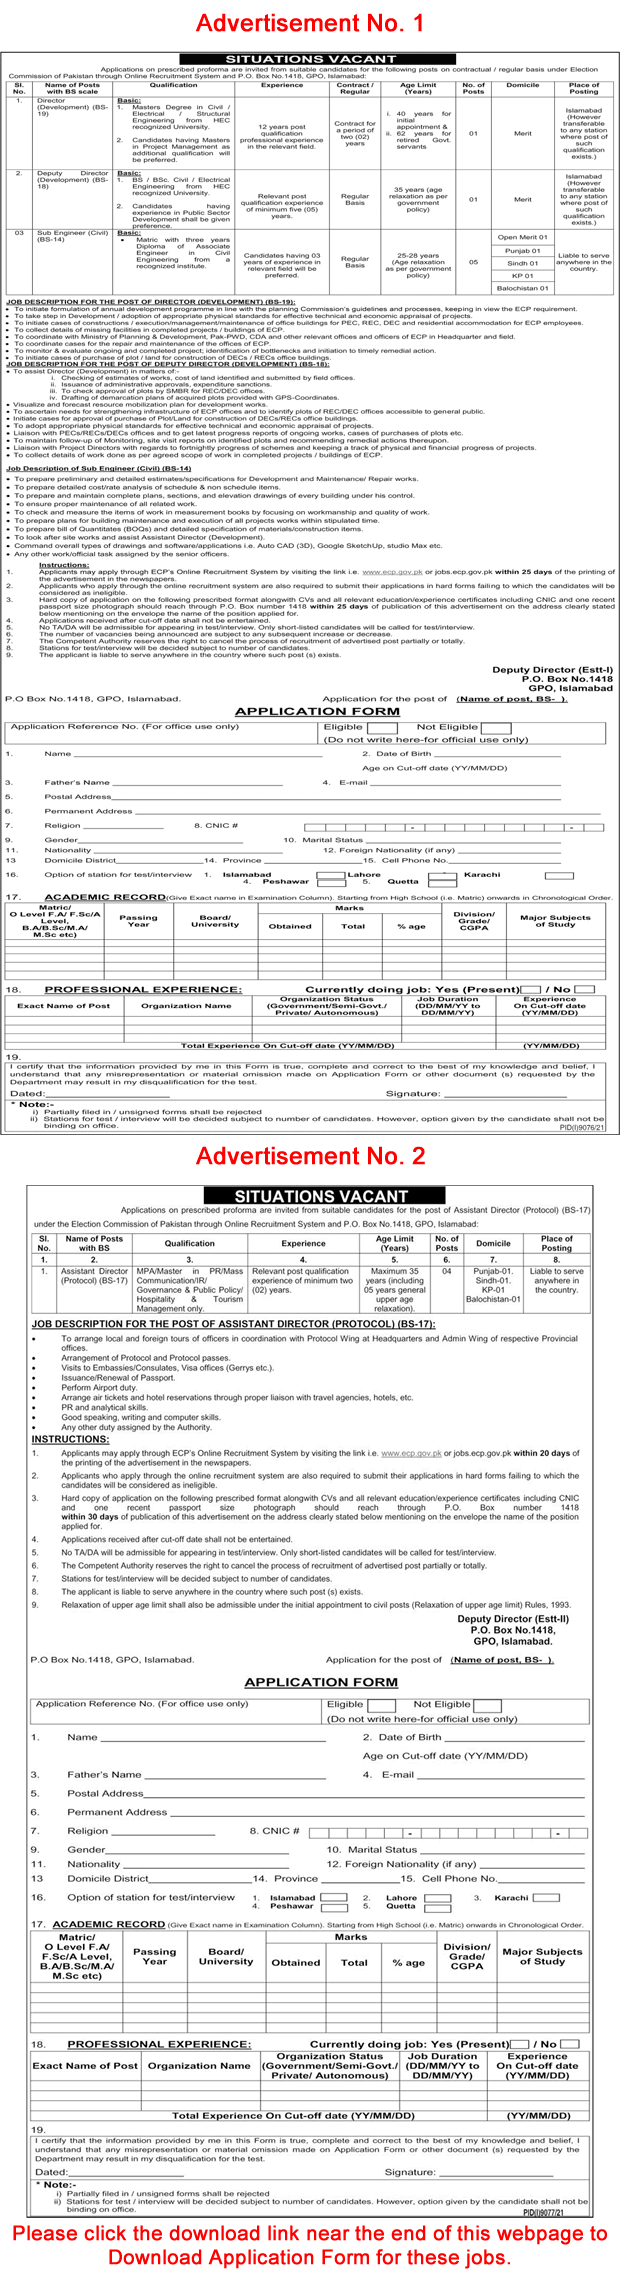 PO Box 1418 GPO Islamabad Jobs June 2022 July Application Form Directors & Others Election Commission of Pakistan Latest